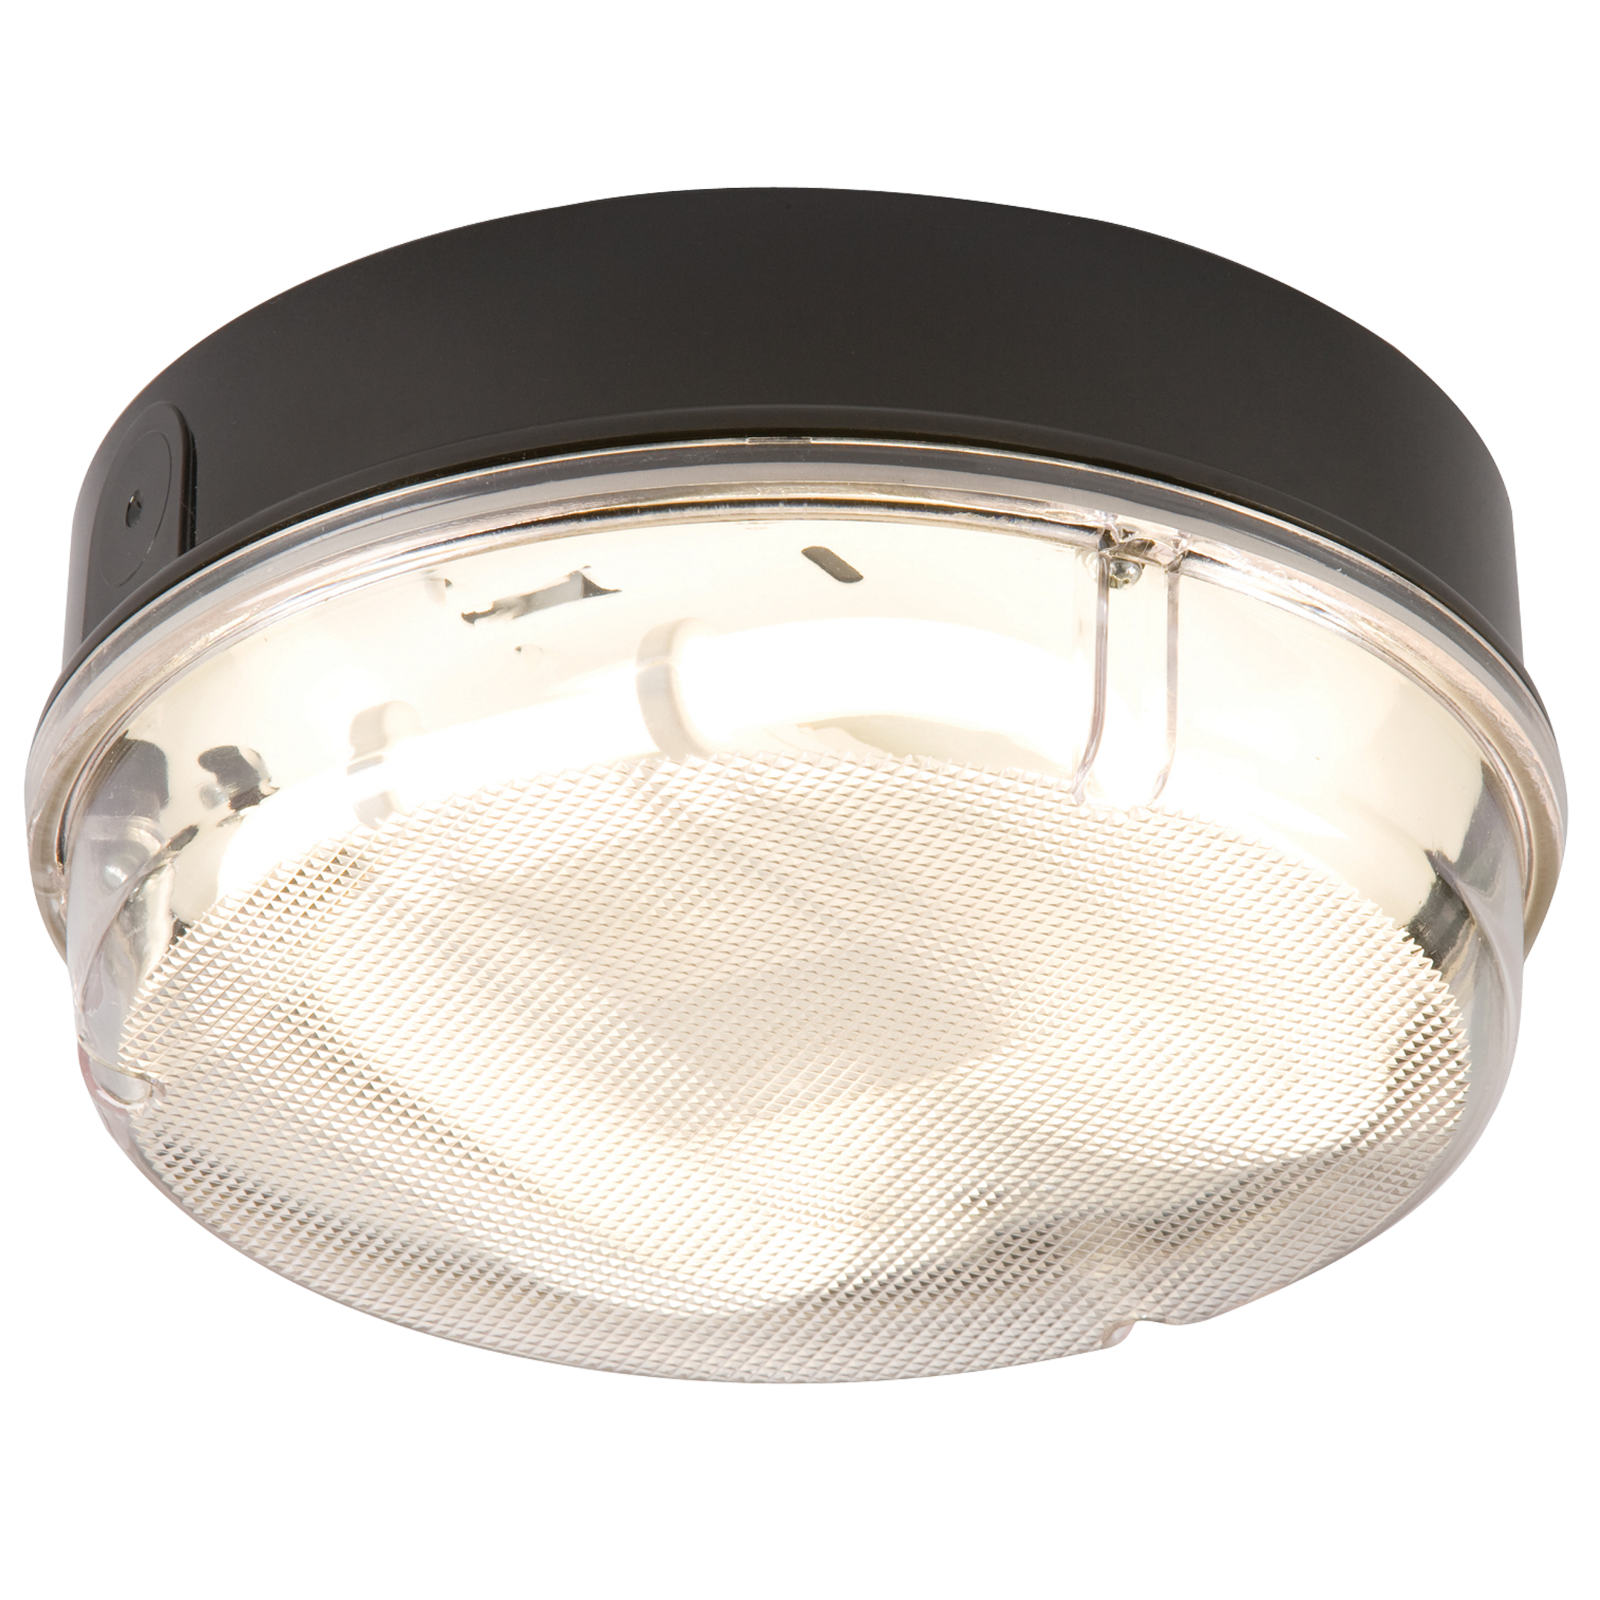 IP65 28W HF Round Bulkhead With Prismatic Diffuser And Black Base - TPR28BPHF 